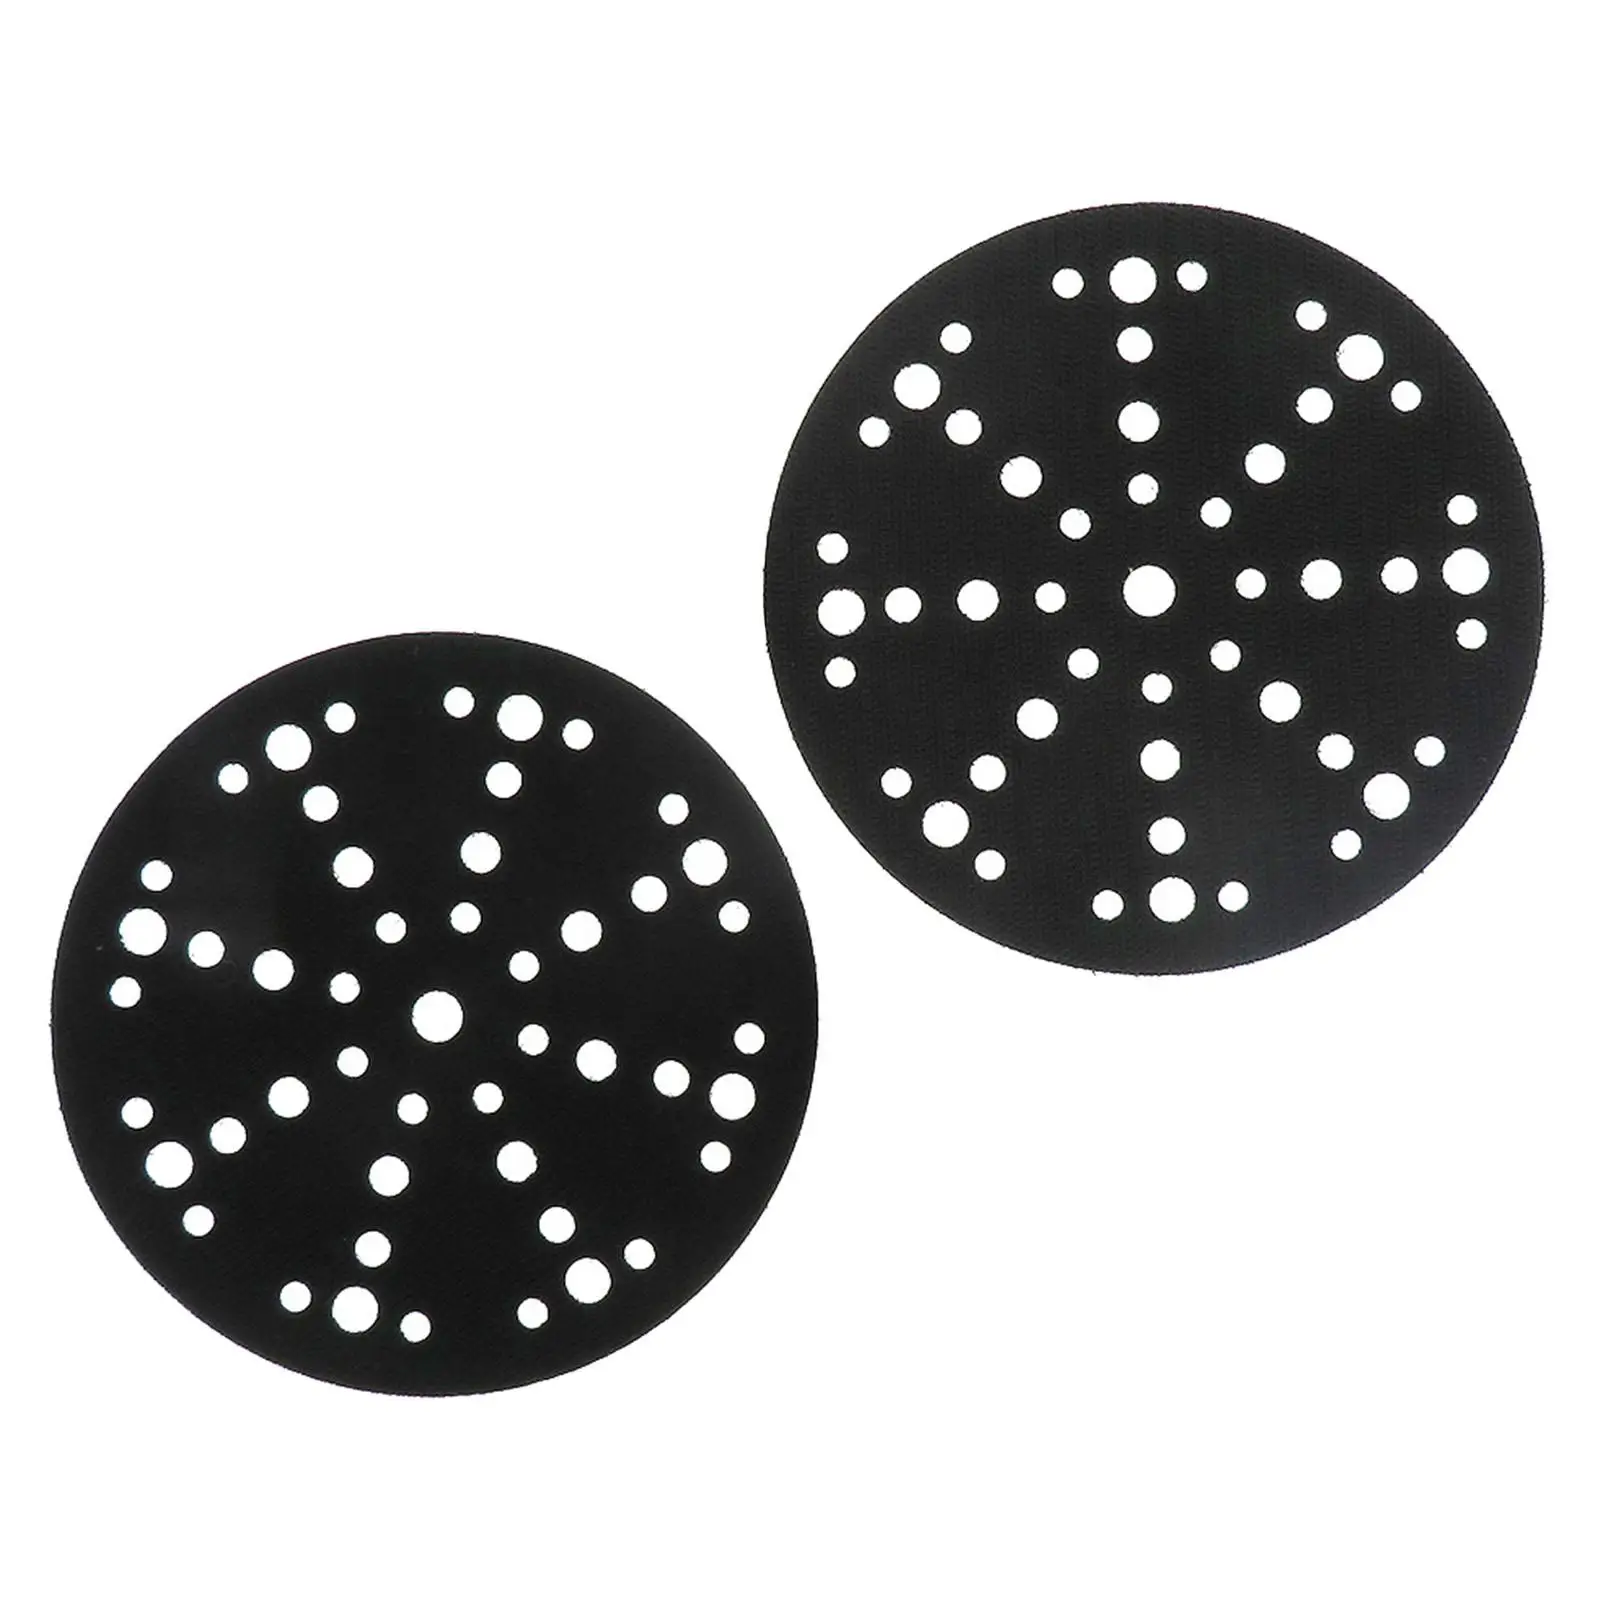 2x Polishing Sanding Pads 6Inches 48 Holes Sanding Disc Abrasive Power Tool Durable Cooling Sander Polisher Tool for Woodworking